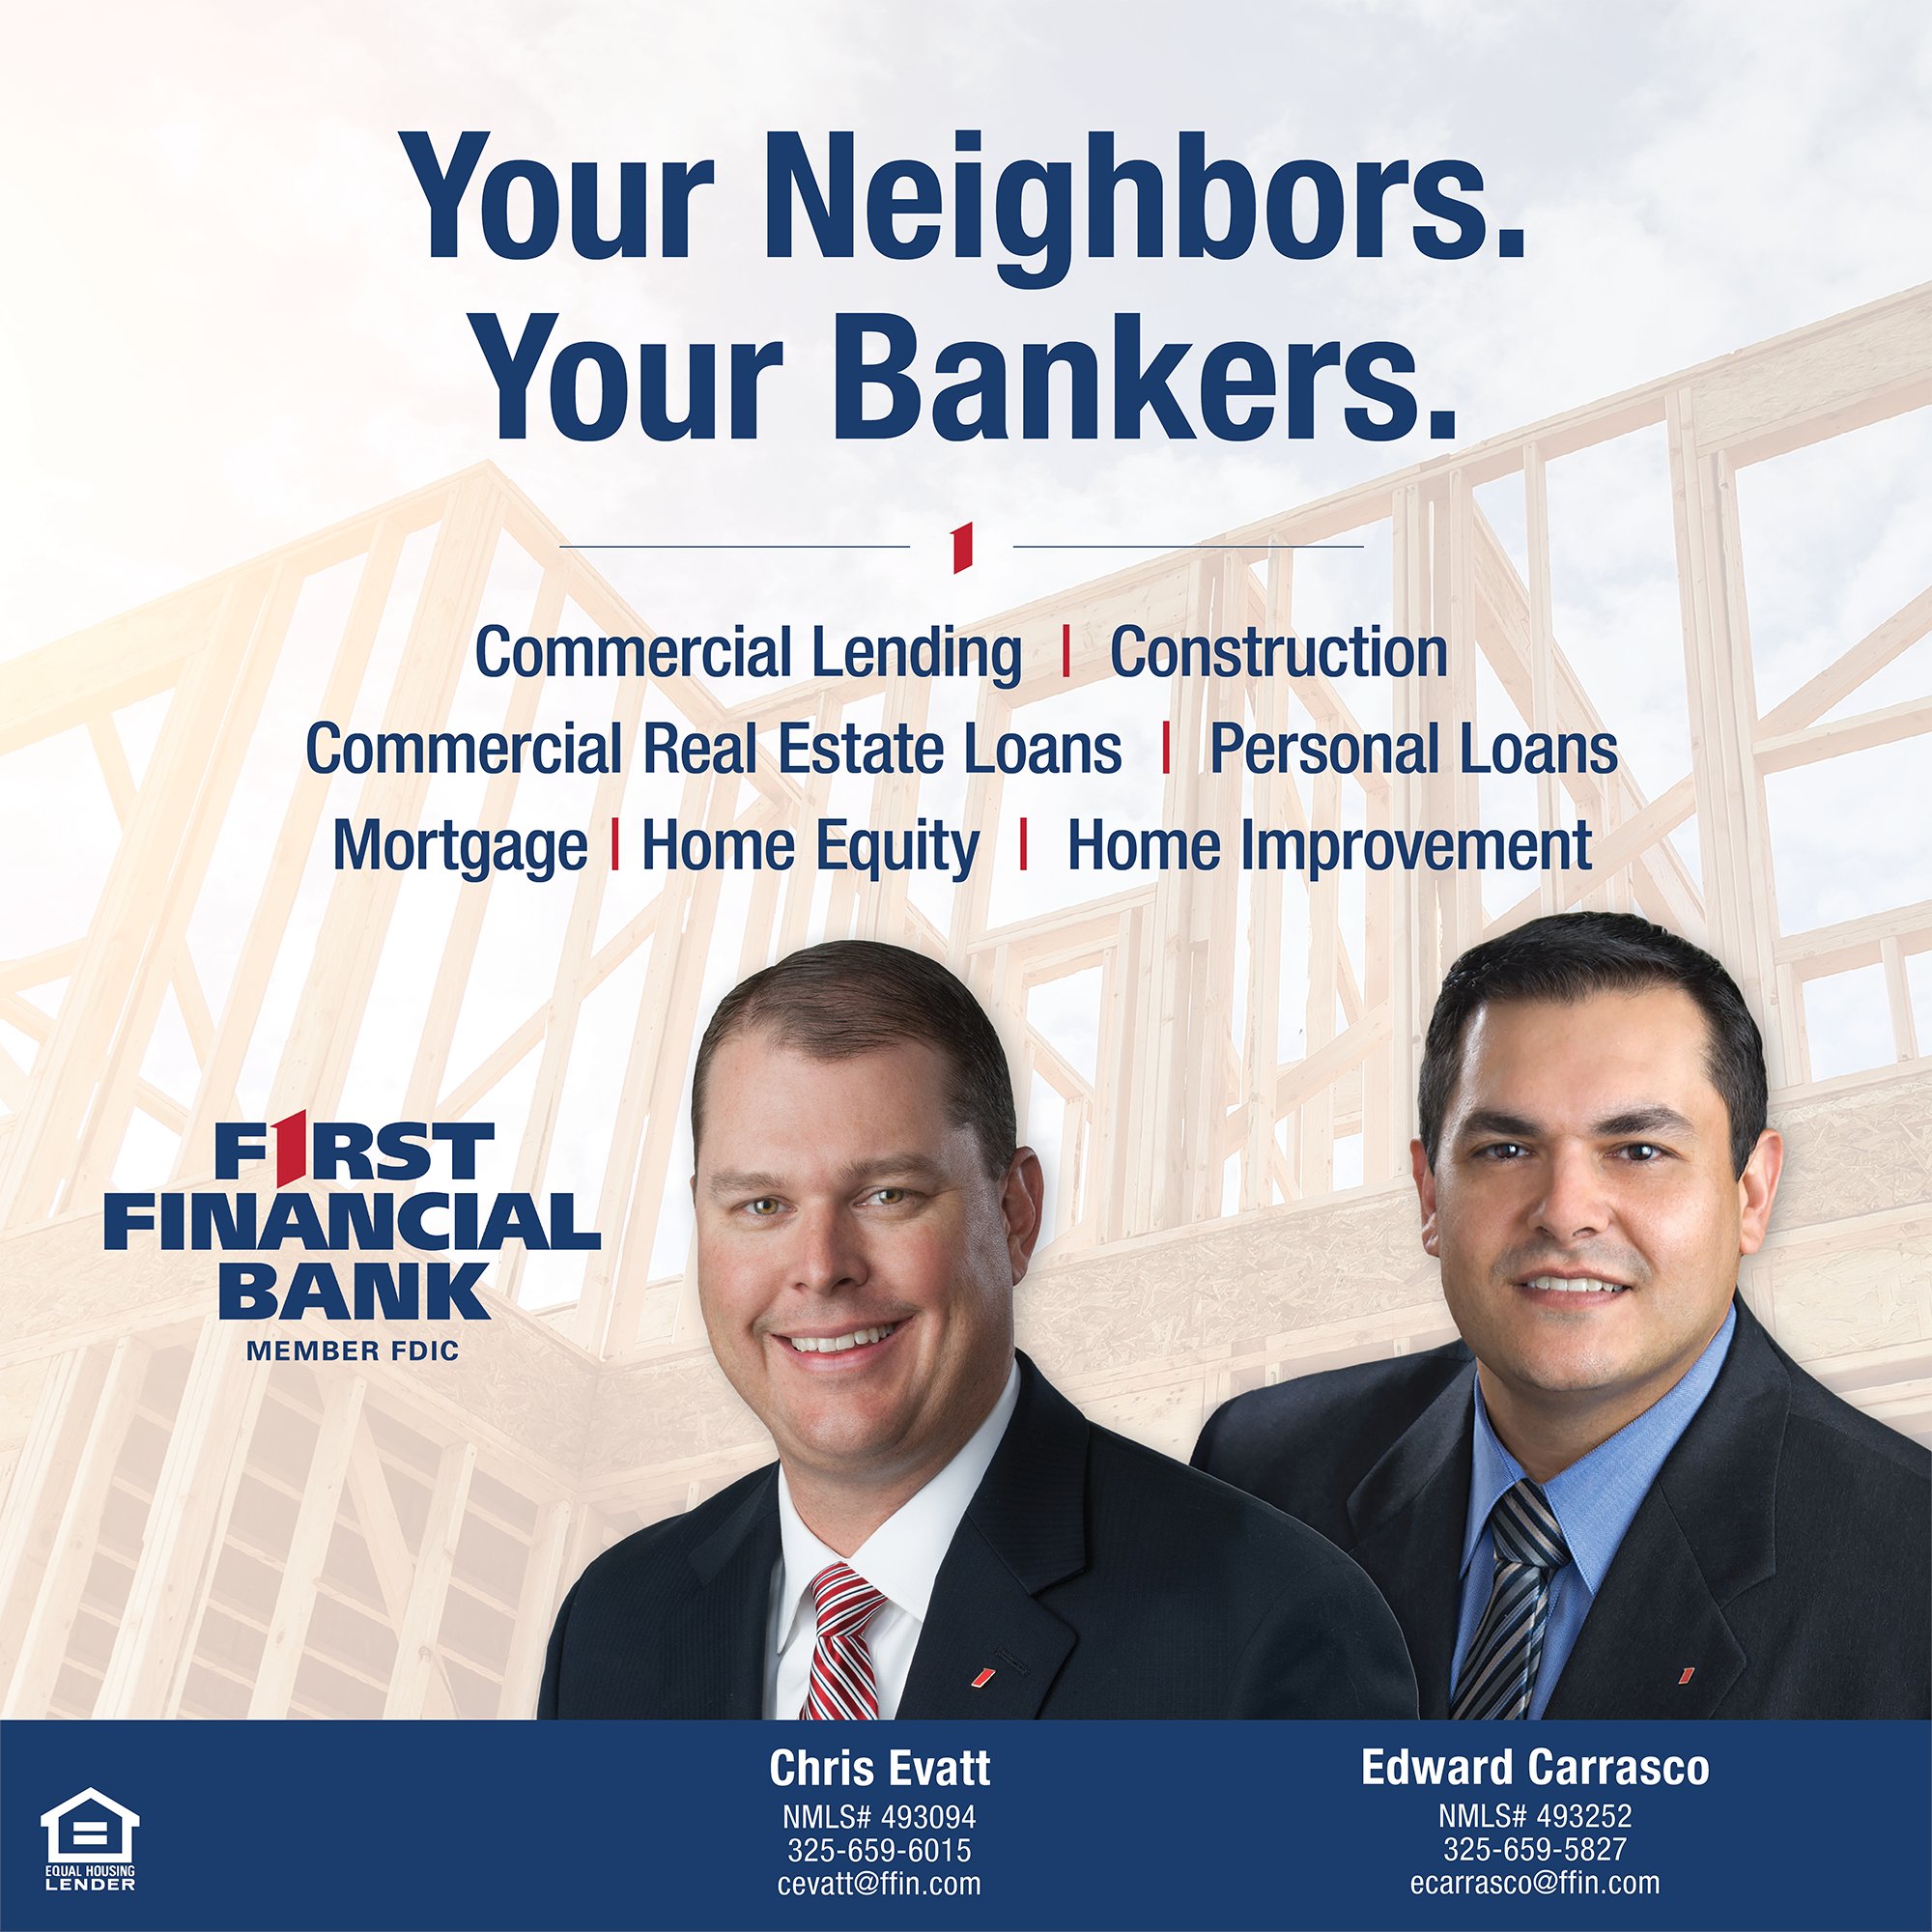 Personal and Commercial Banking, Home Loans, Wealth Strategies